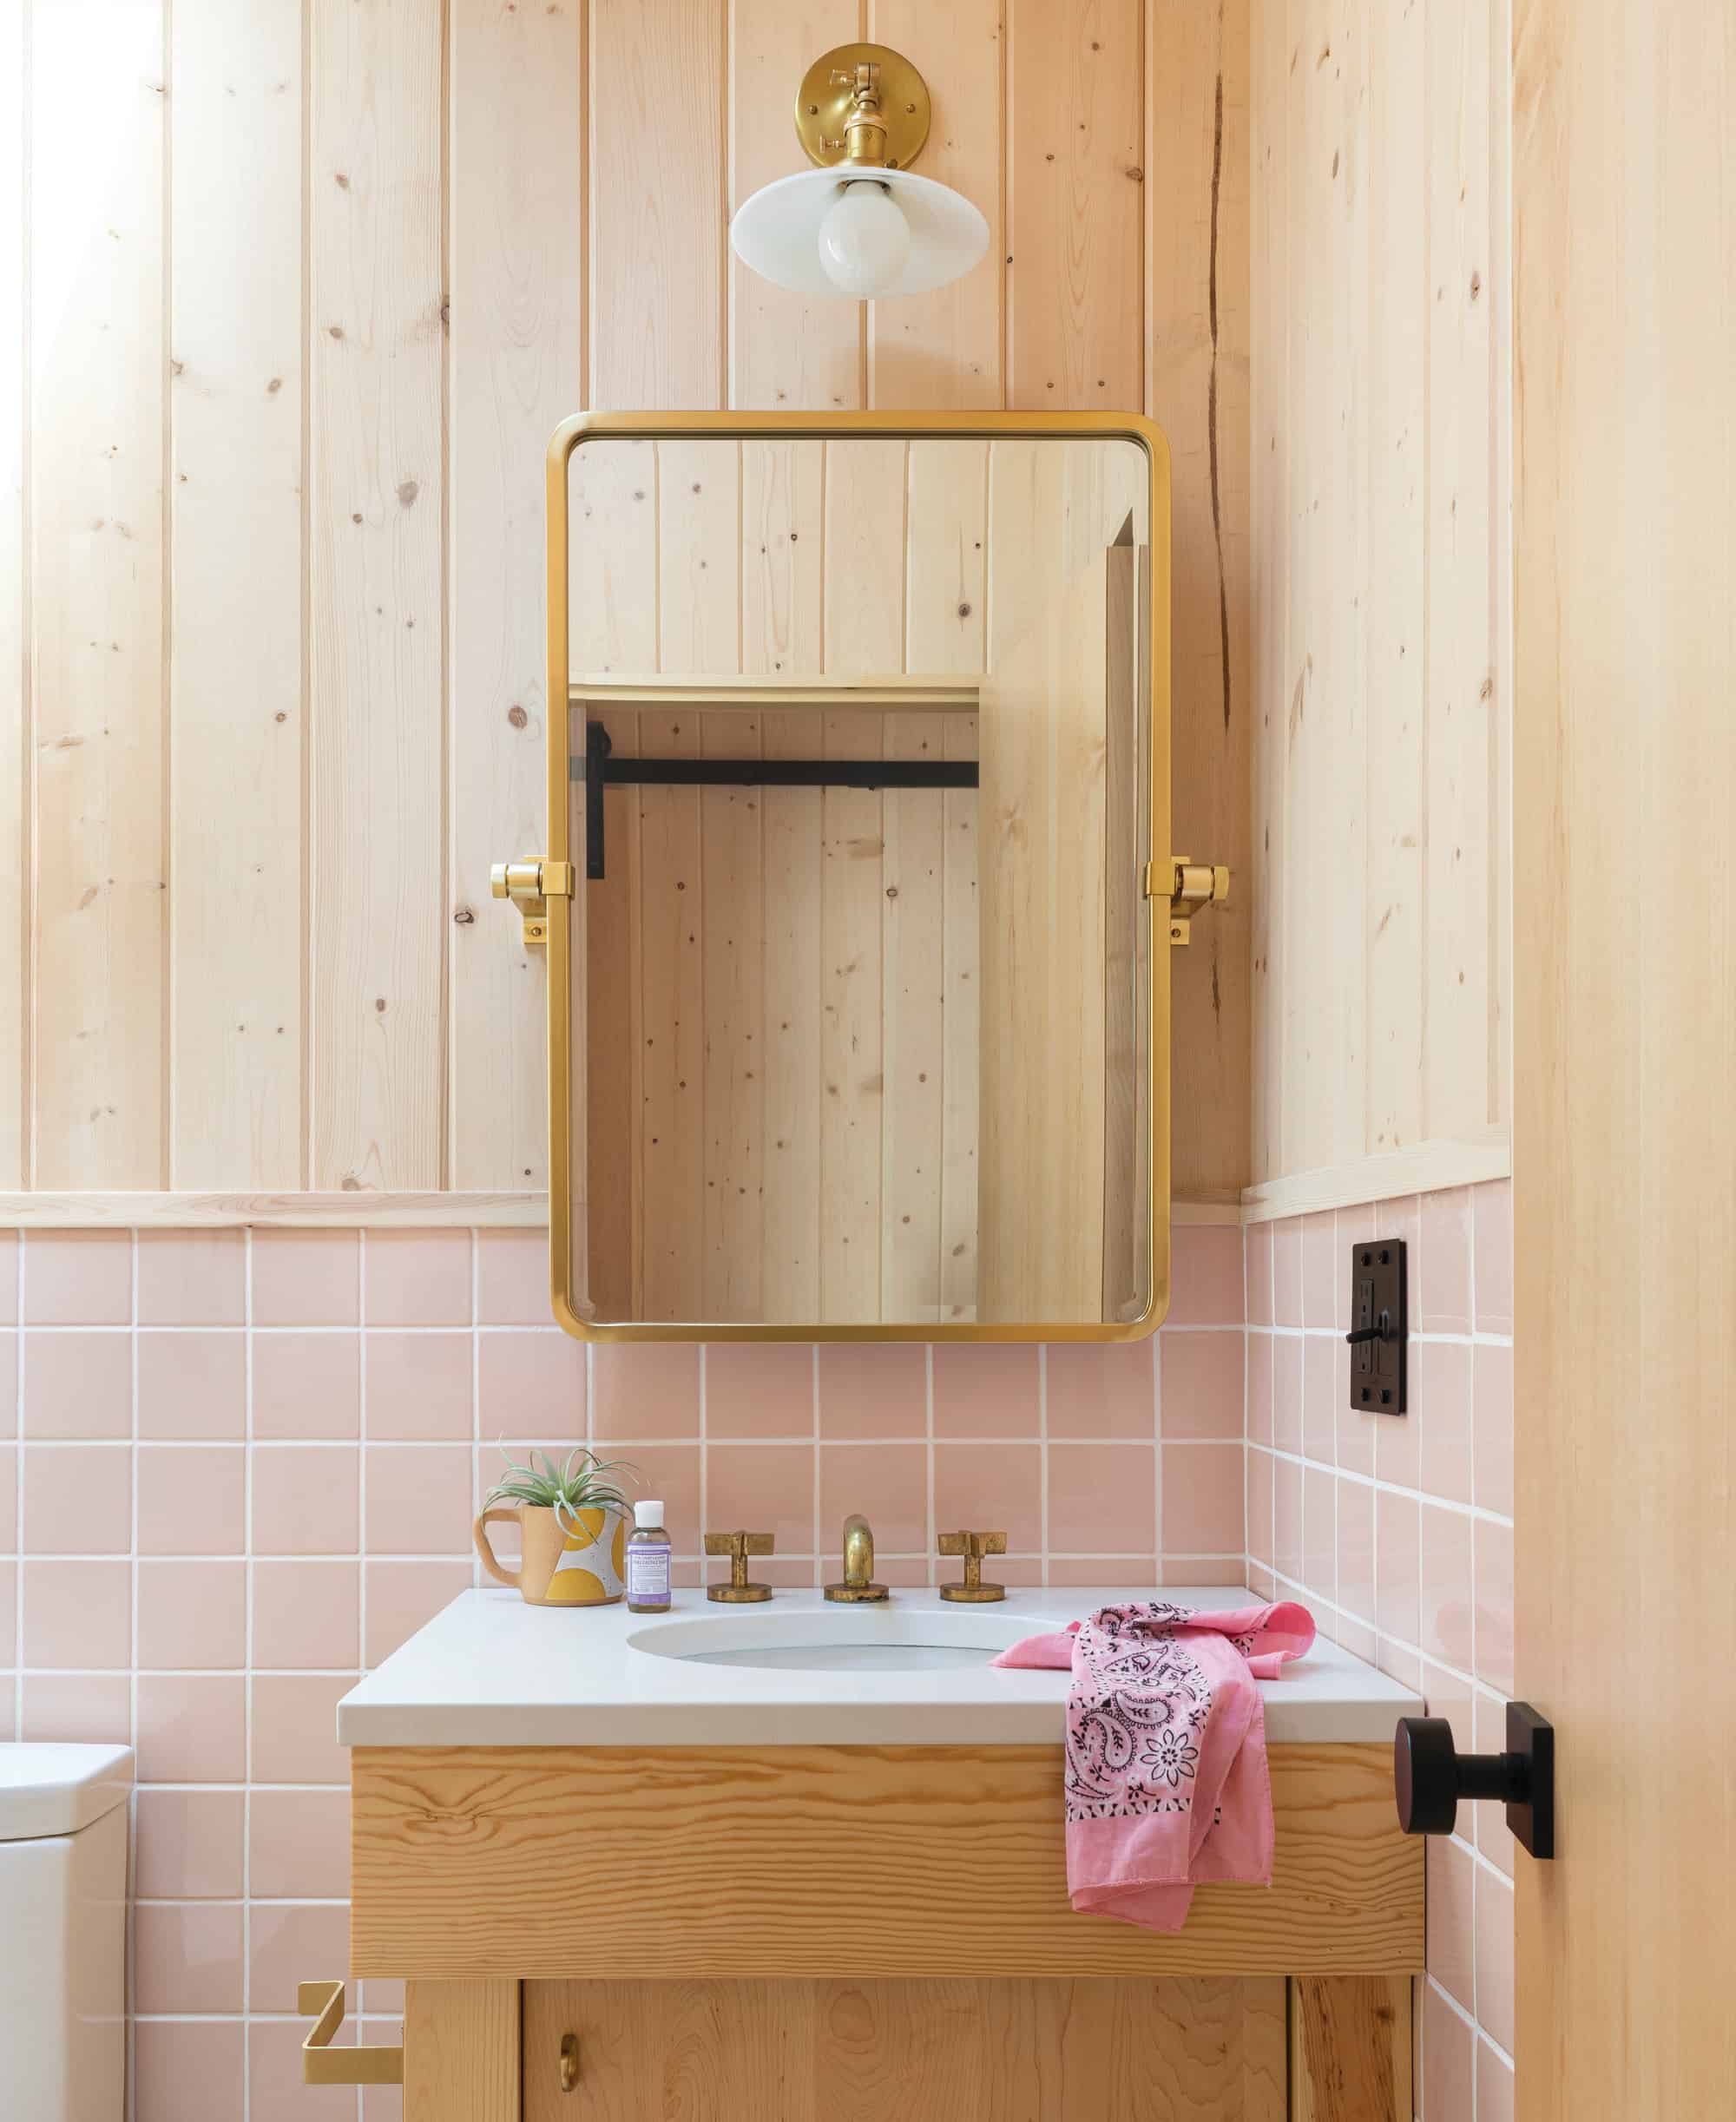 The knotty pine and brass give this bathroom an updated cabin feel.